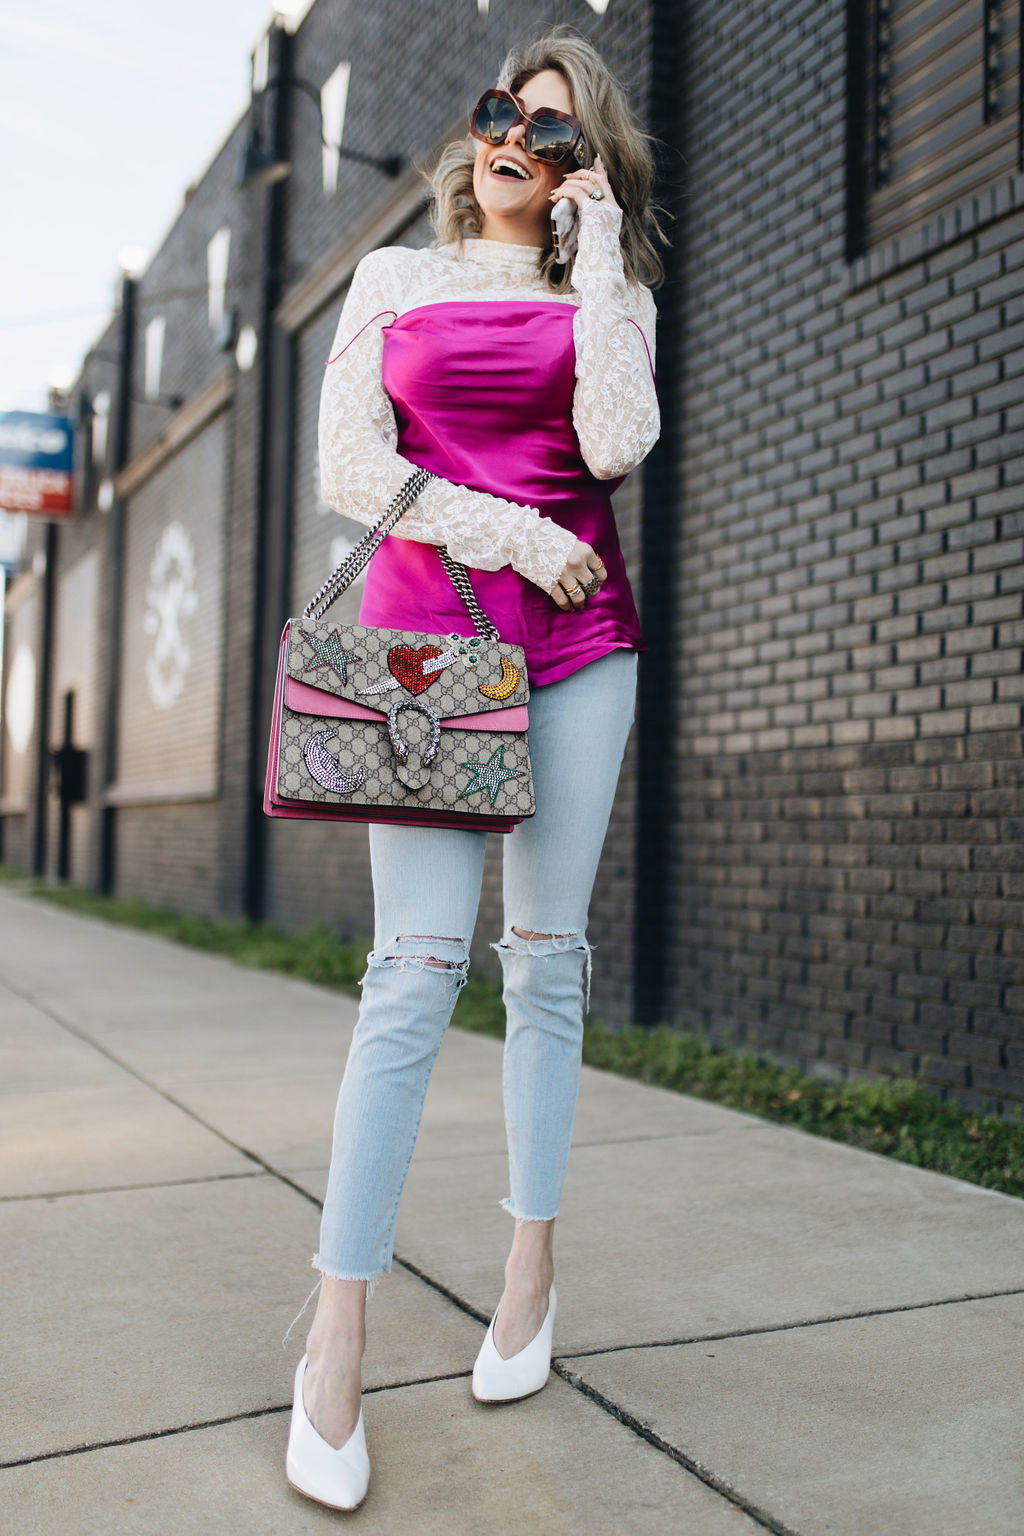 Looking for GIRLY GIRL Valentine's Day outfit ideas? Style Blogger Life Lutzurious styles this GORG pink and lace top, Gucci shoulder bag frayed skinny jeans, and white pointy toe heels.